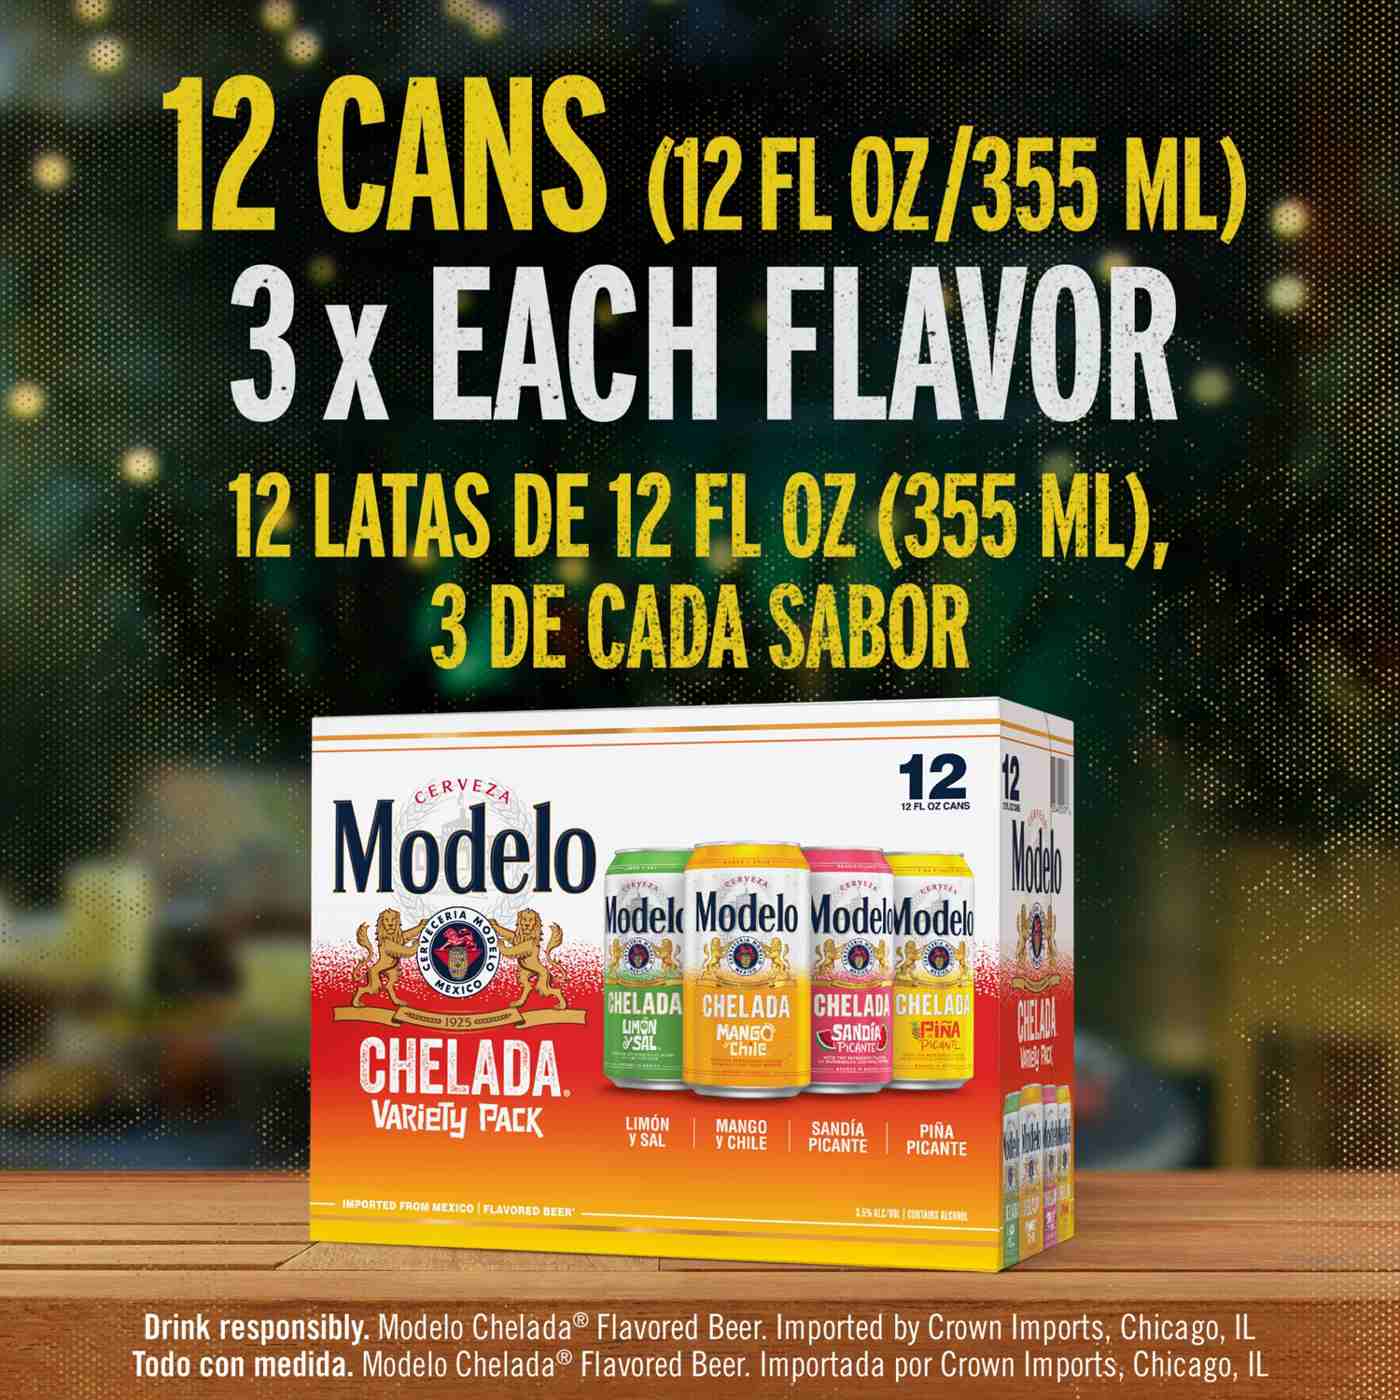 Modelo Chelada Variety Pack Mexican Import Flavored Beer 12 oz Cans, 12 pk; image 9 of 11